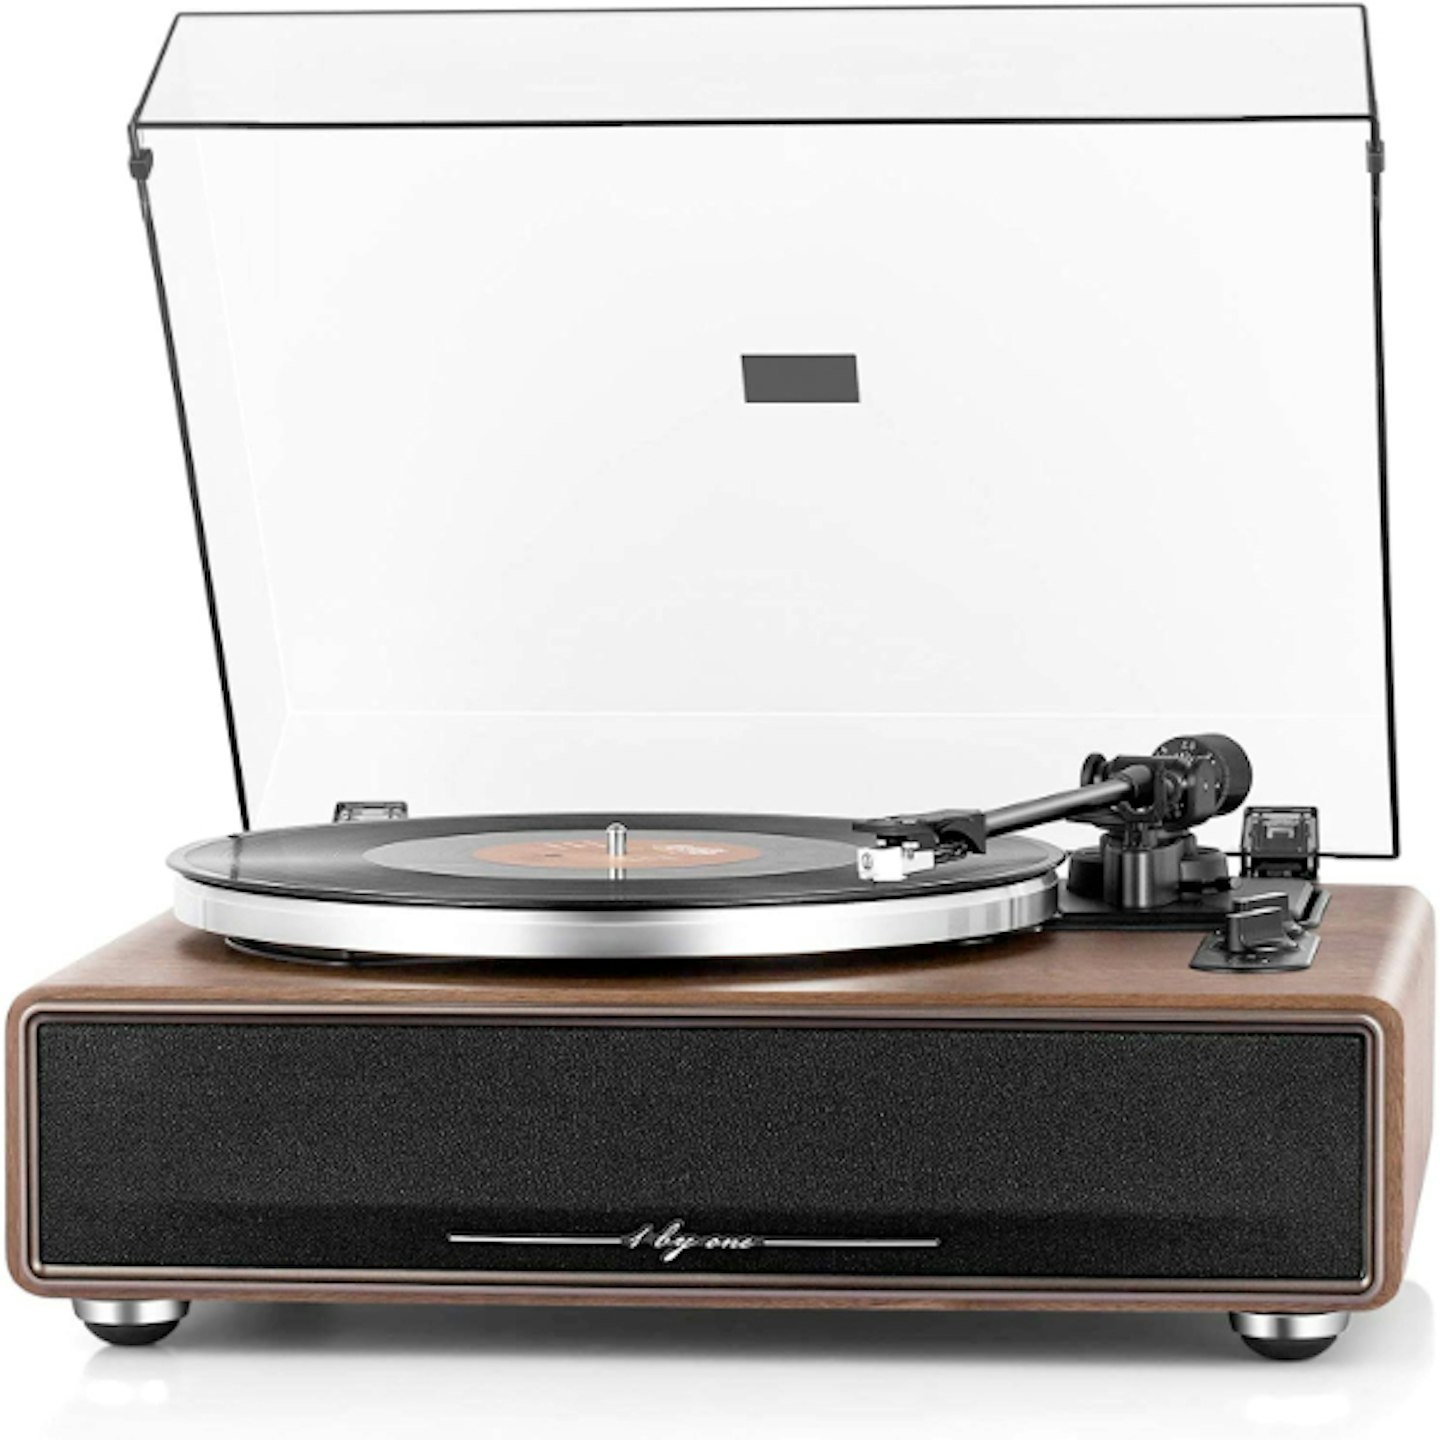 1 BY ONE High Fidelity Belt Drive Bluetooth Turntable with Built-in Speakers